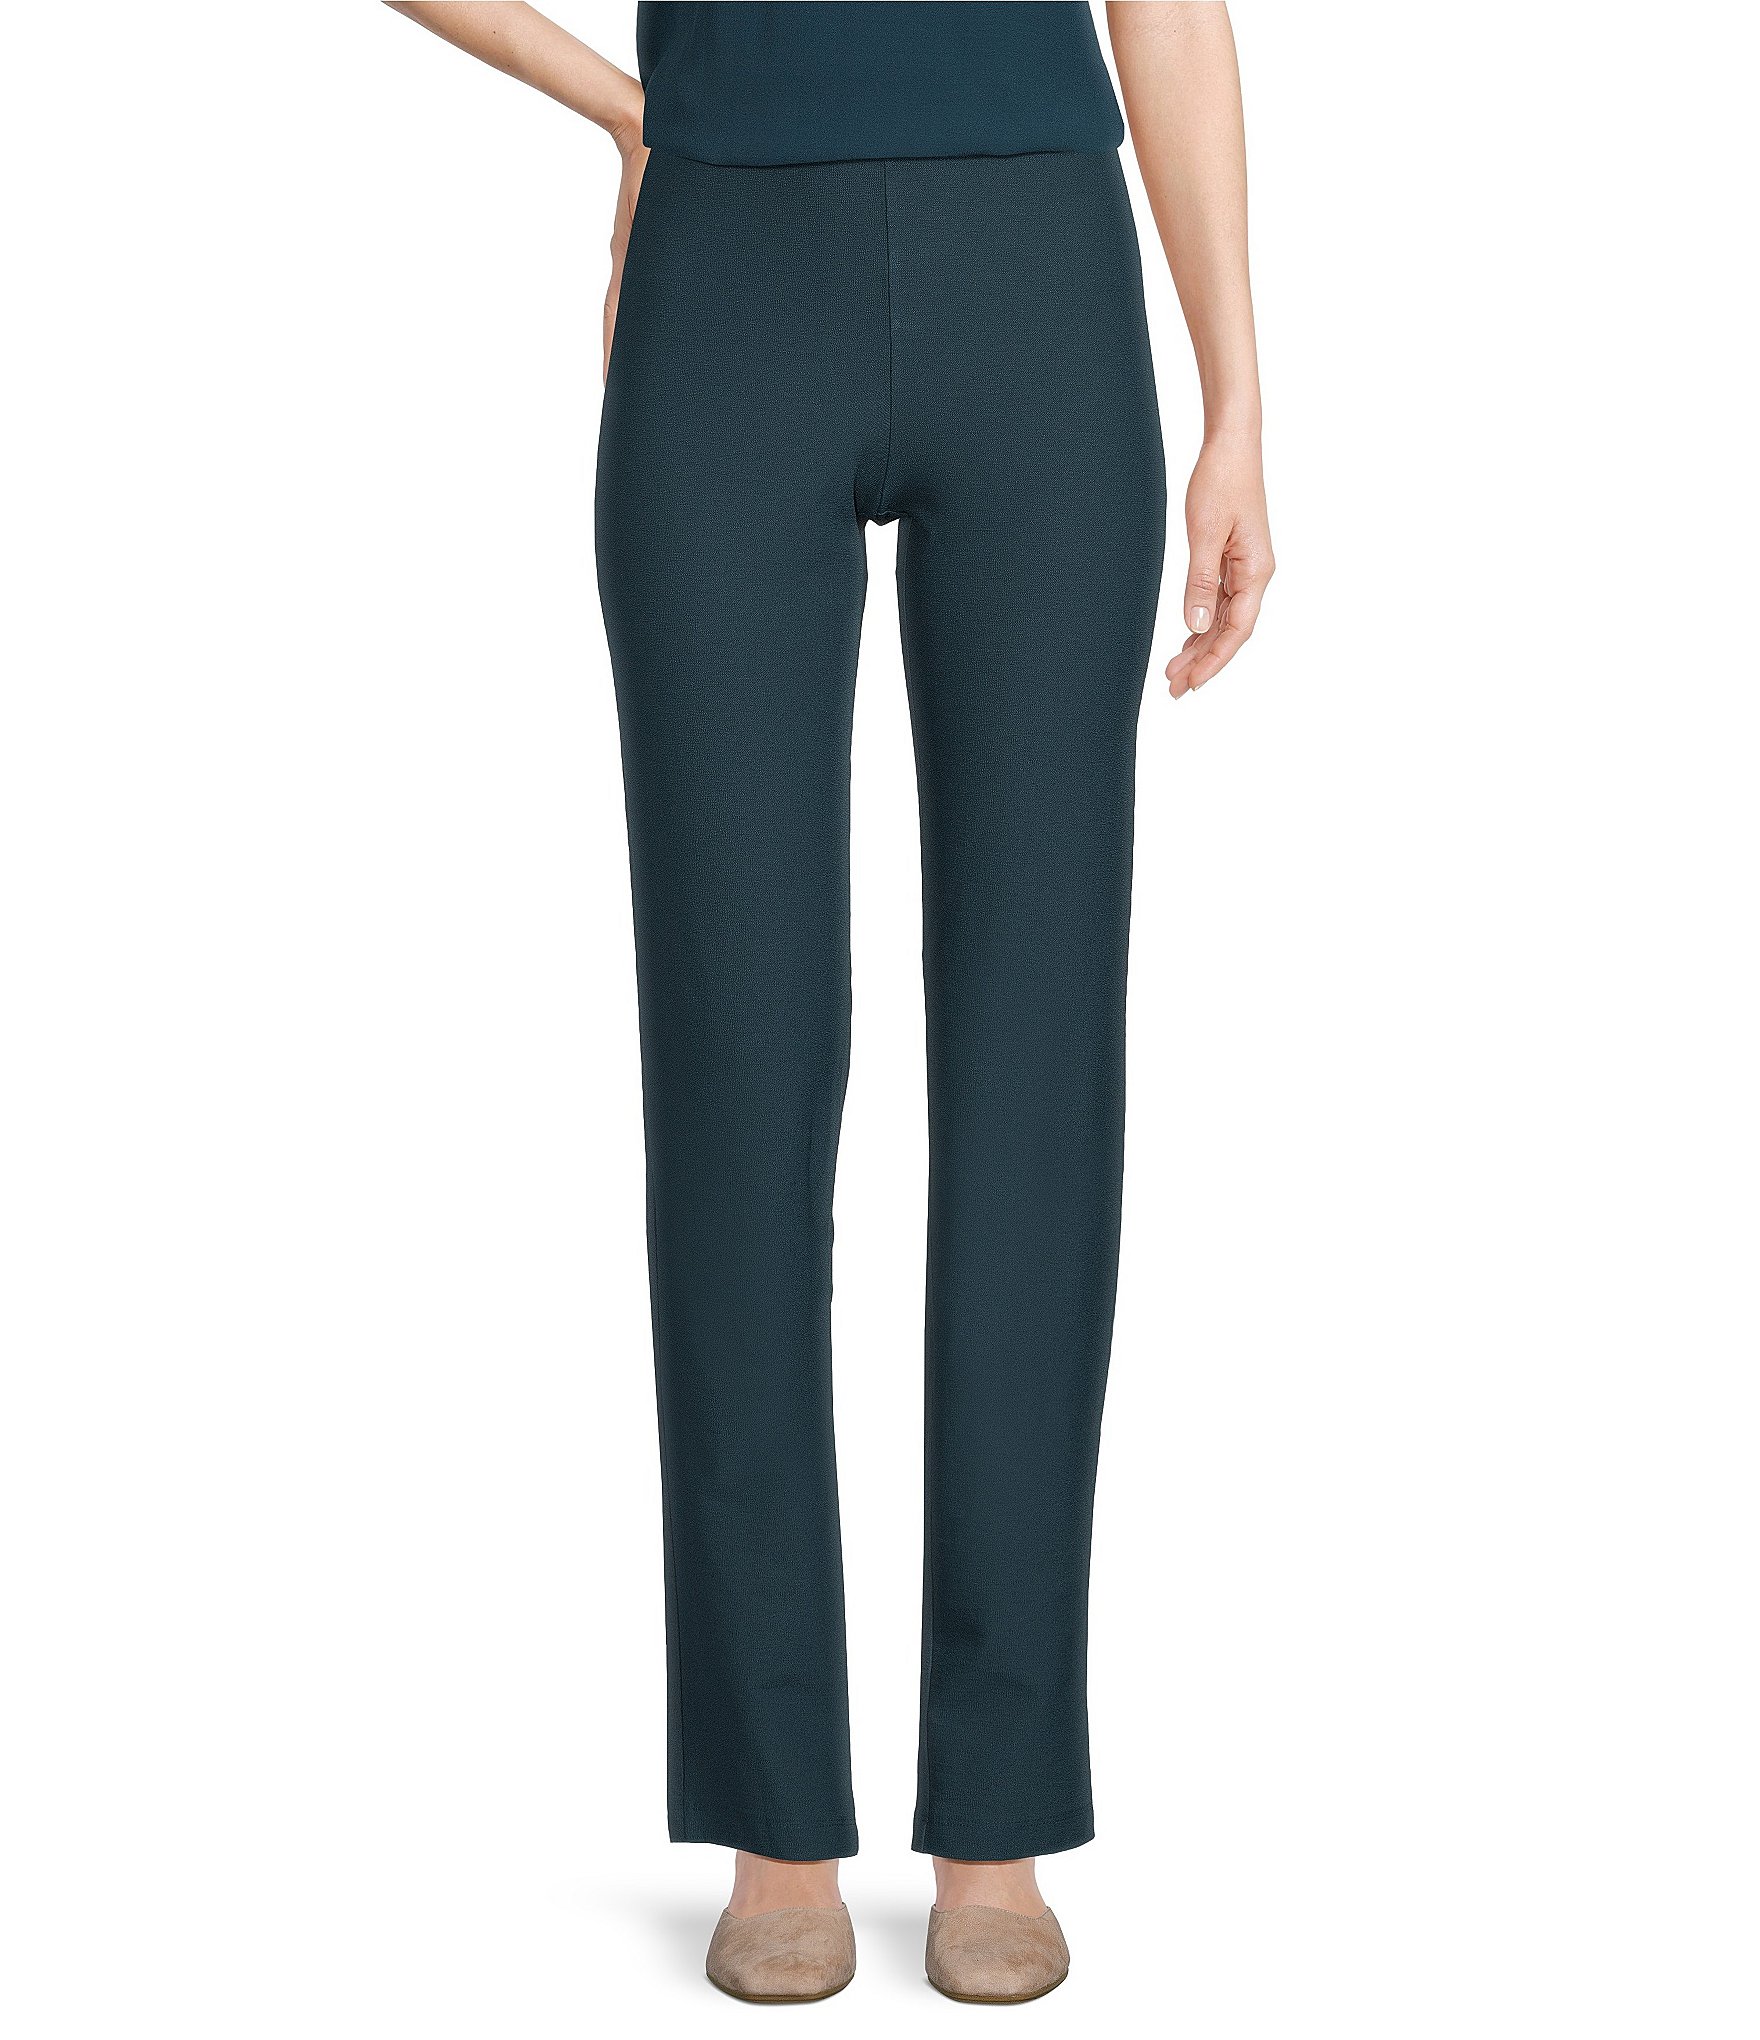 NWT Eileen Fisher Graphite Washable Stretch Crepe Slim Ankle Pants